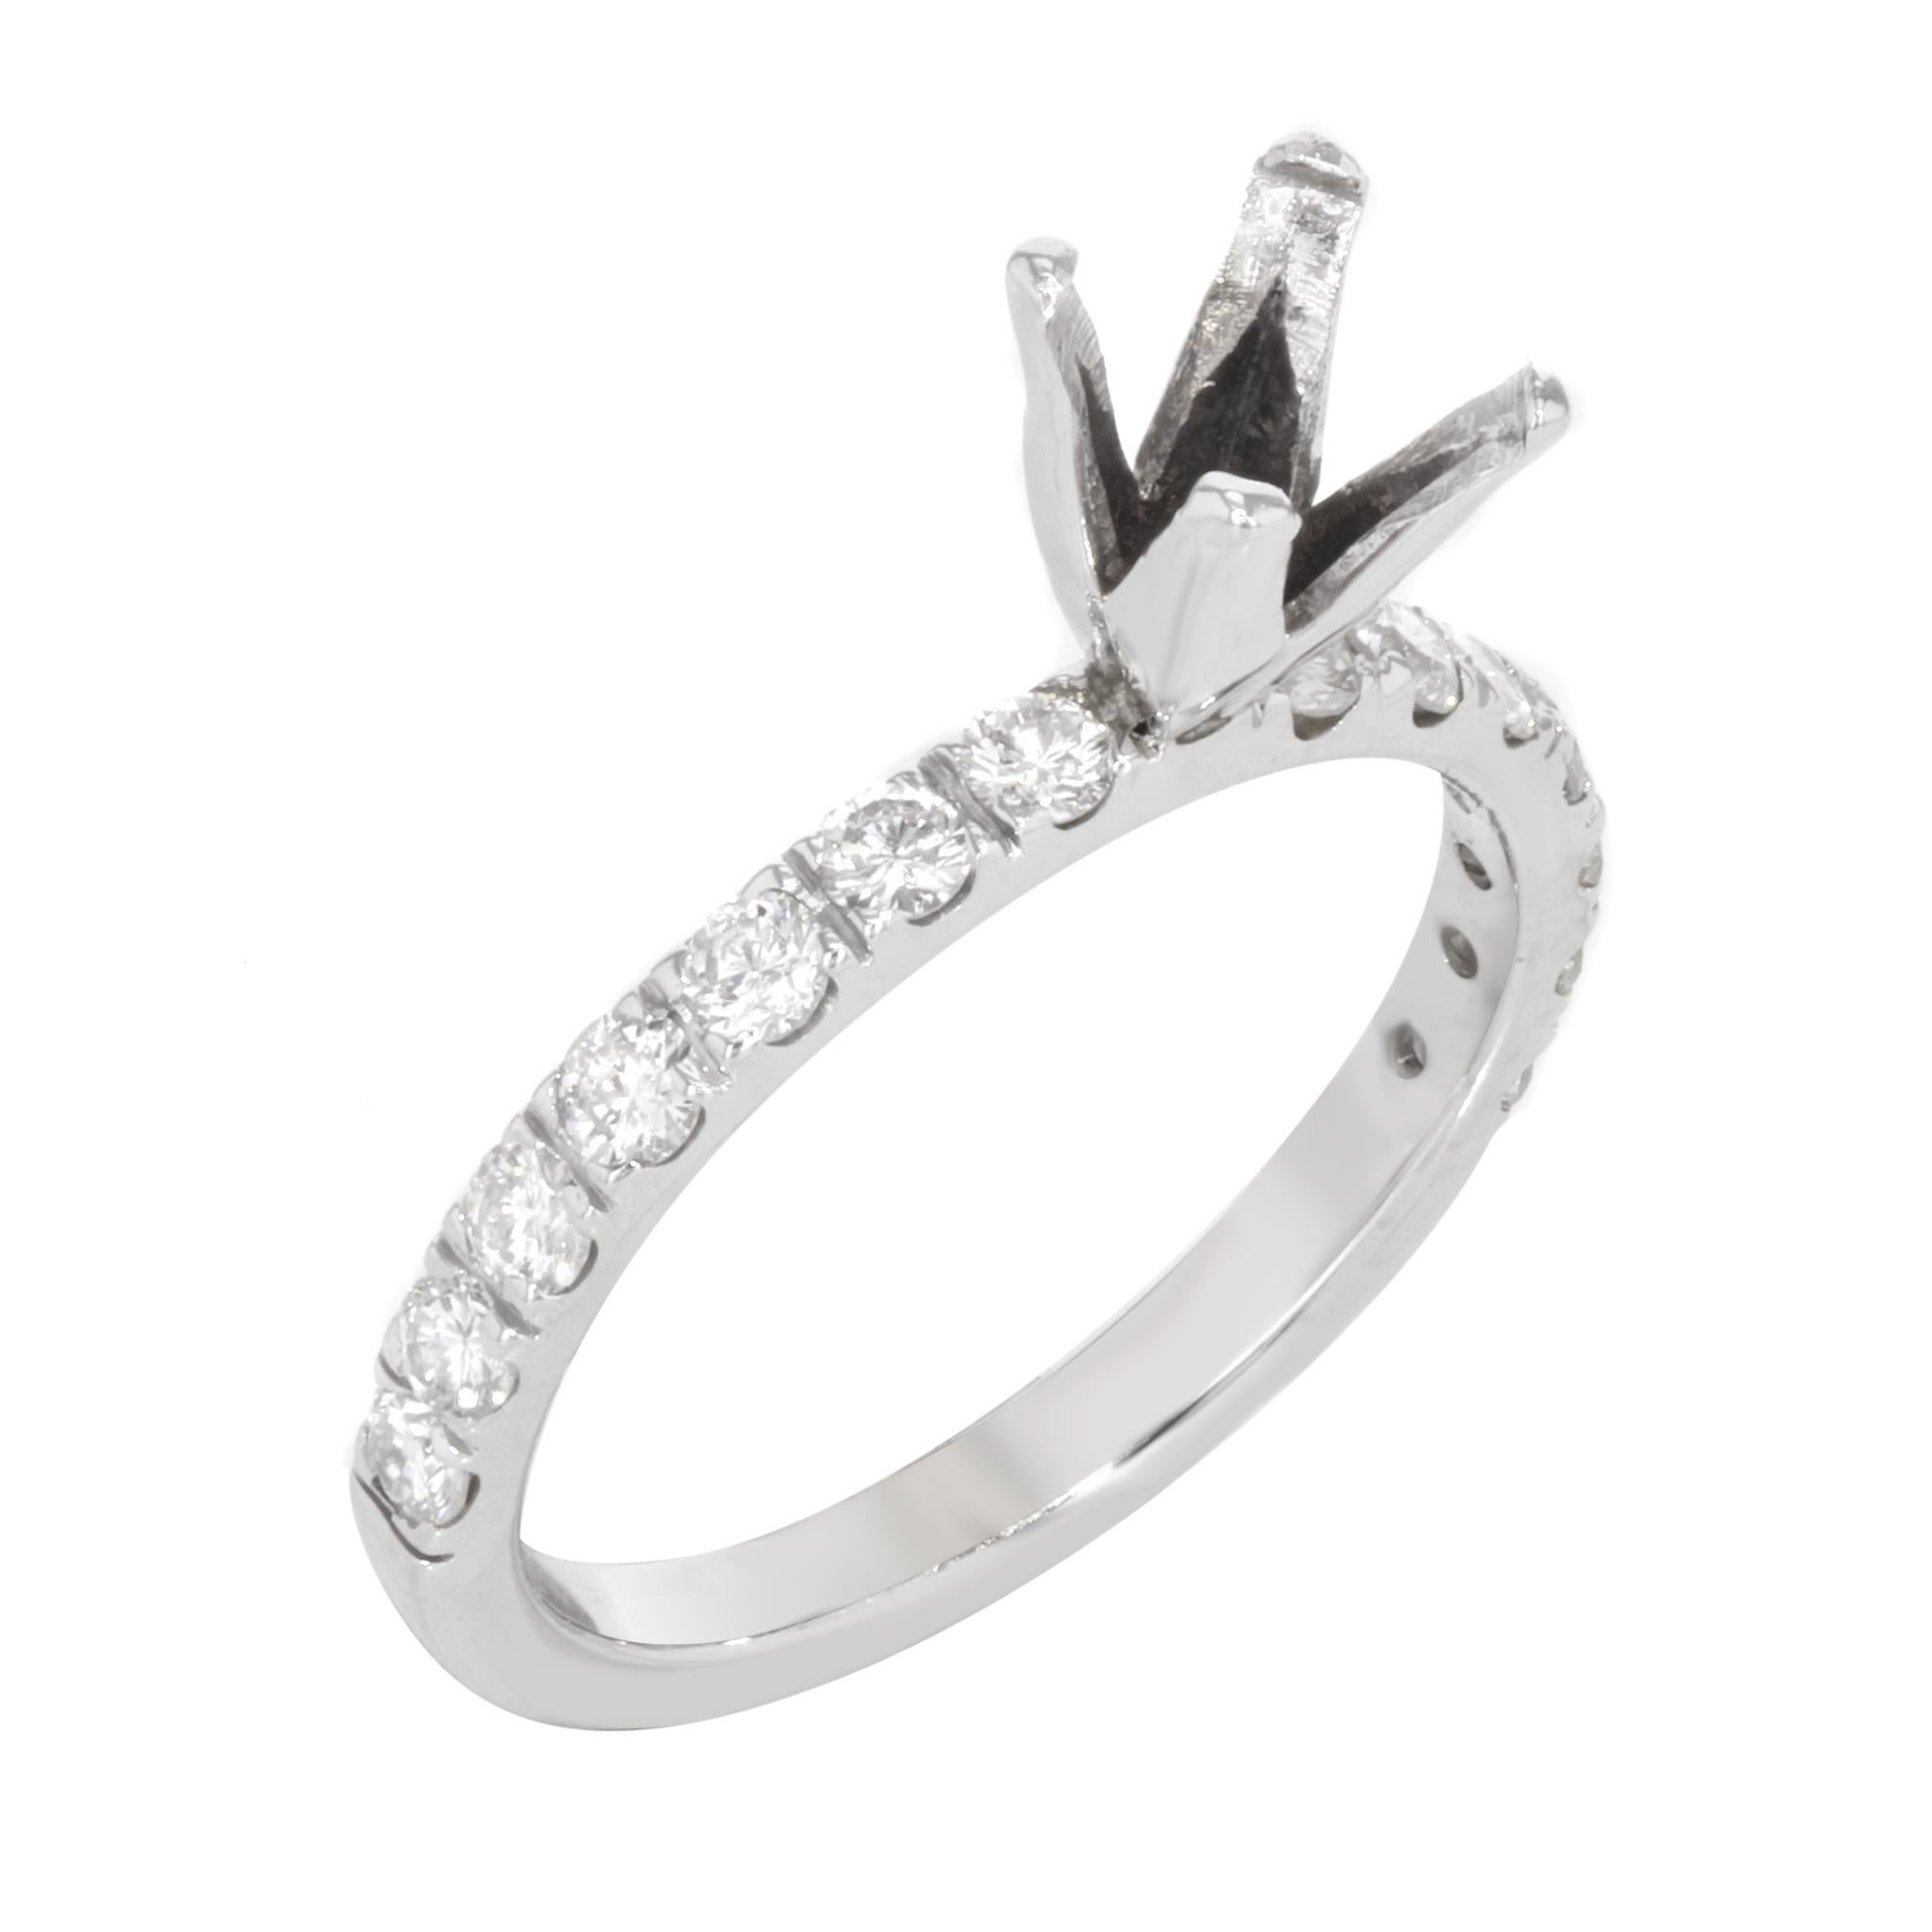 This beautiful 14k white gold engagement ring setting features a 4 prong setting mounting with 7 accented round cut stones on both sides weighing approx. 0.75 Cttw. Ring size 7 (sizable). Total weight: 2.5 gms. Comes with a presentable gift box.
All